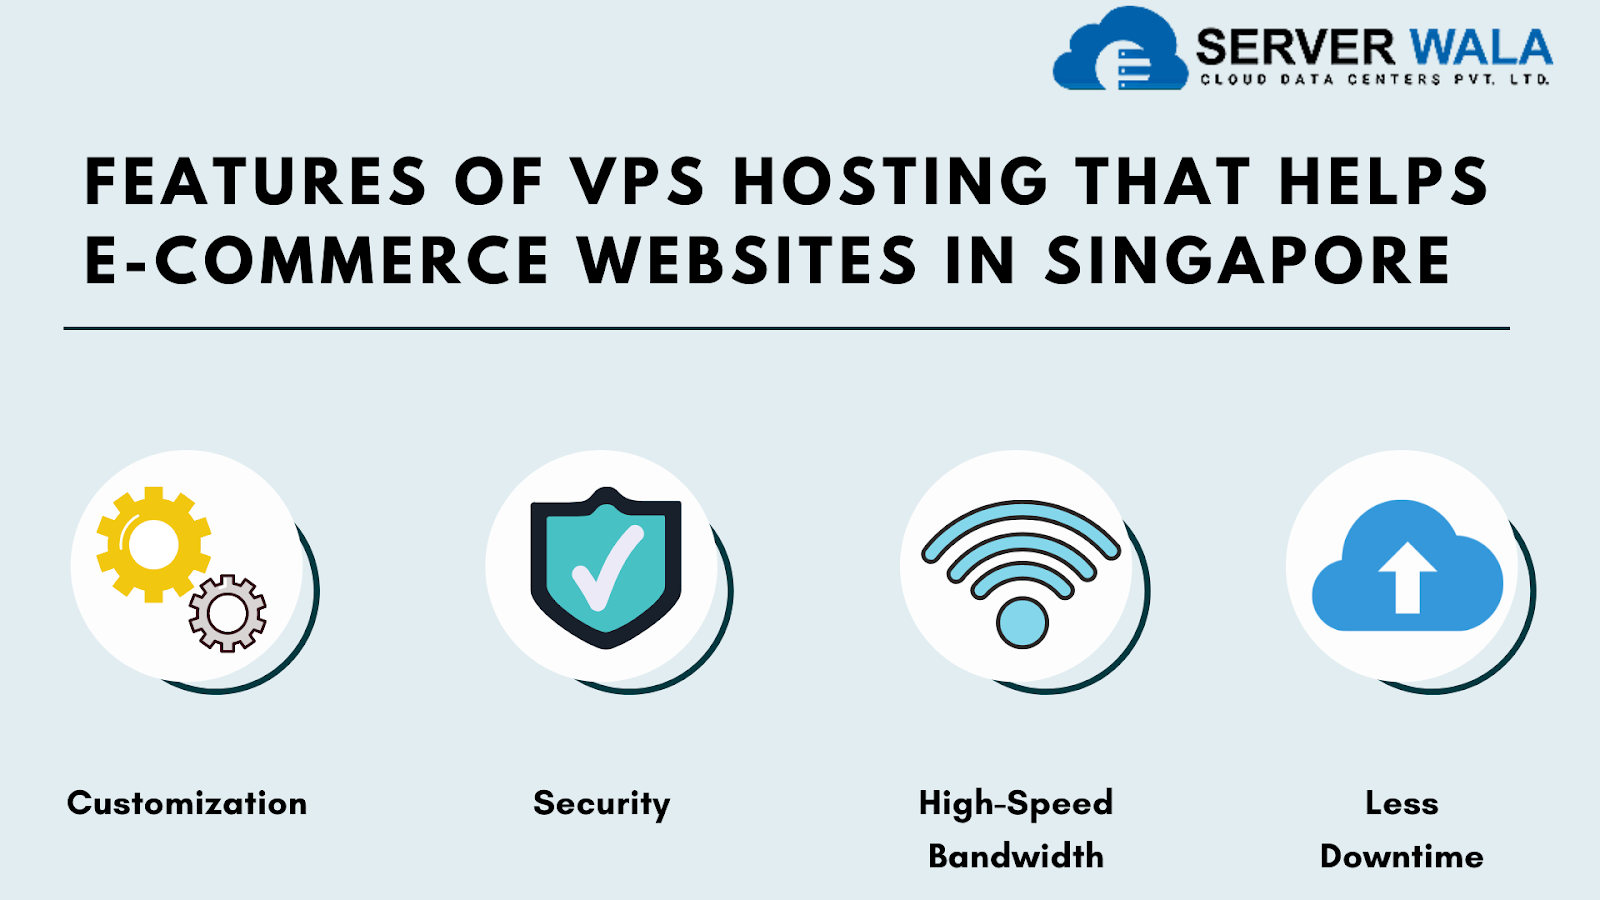 Features of VPS Hosting
